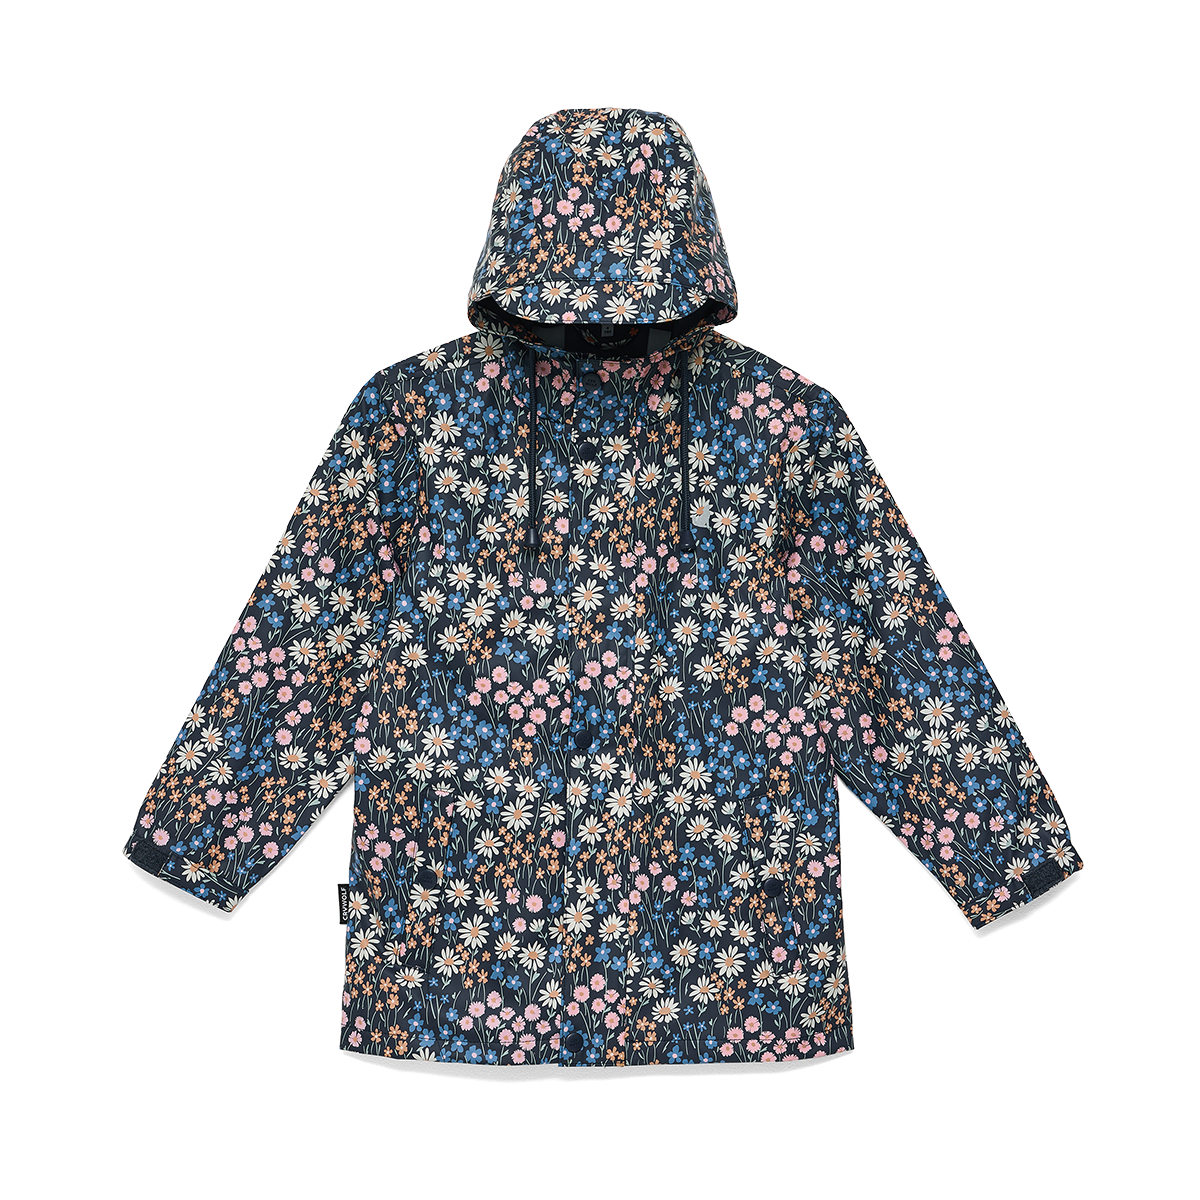 Crywolf Play Jacket Winter Floral